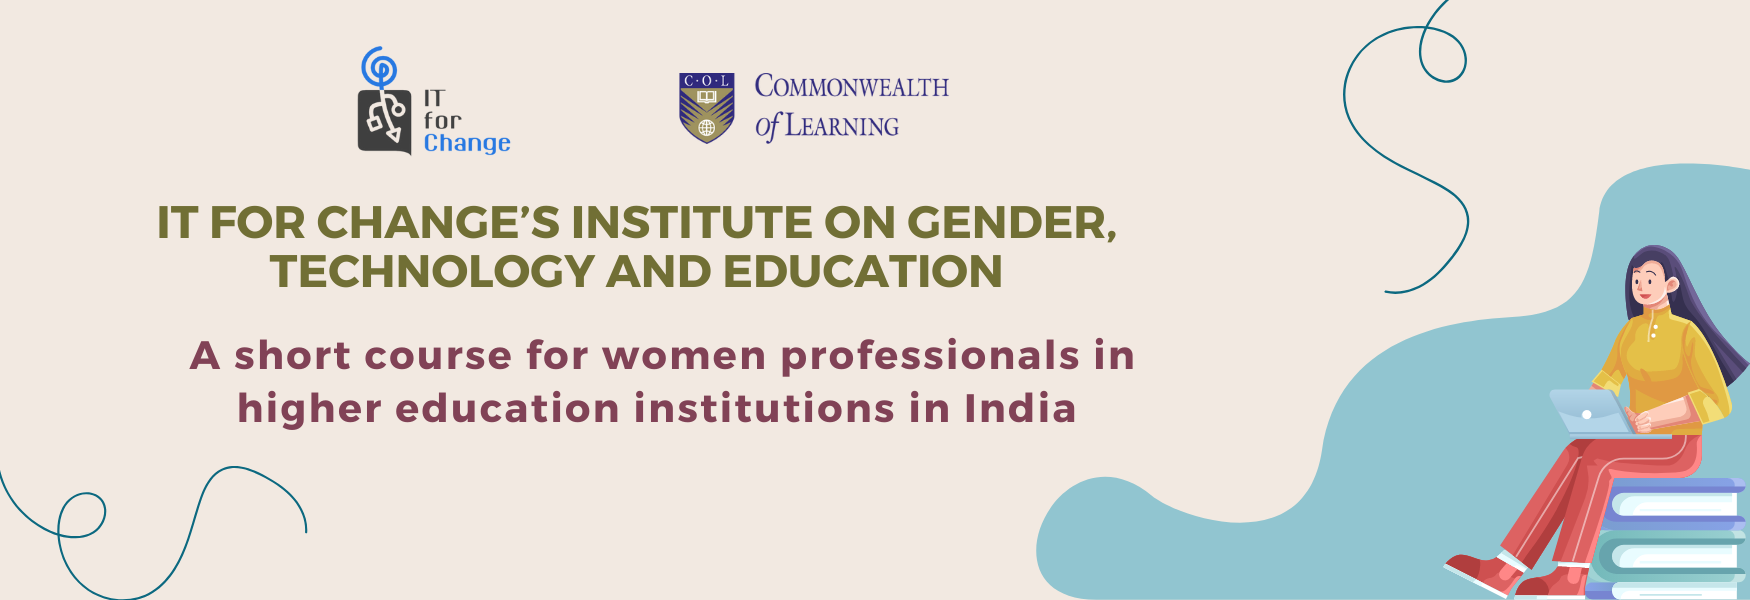 Short Course for Women Professionals in Higher Education Institutions in India 